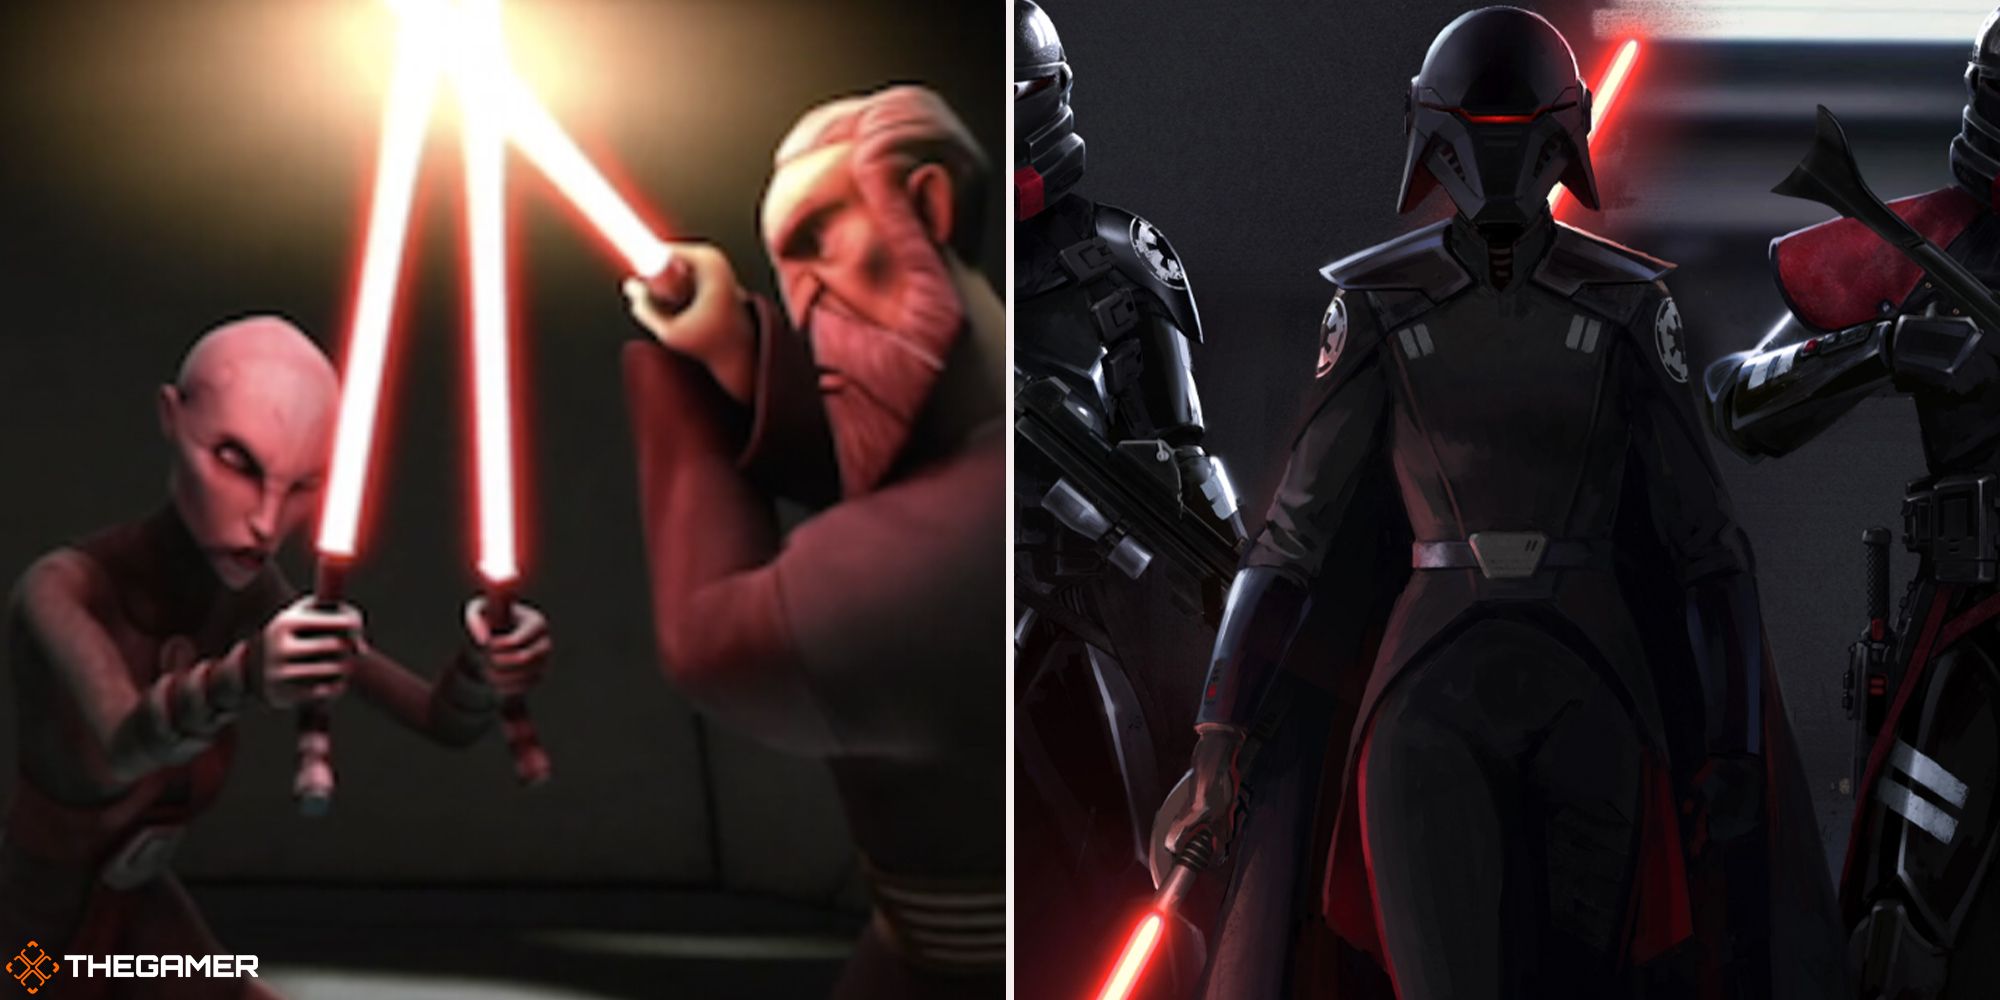 Star Wars - Asajj Ventress and Count Dooku (left), Inquisitor (right)